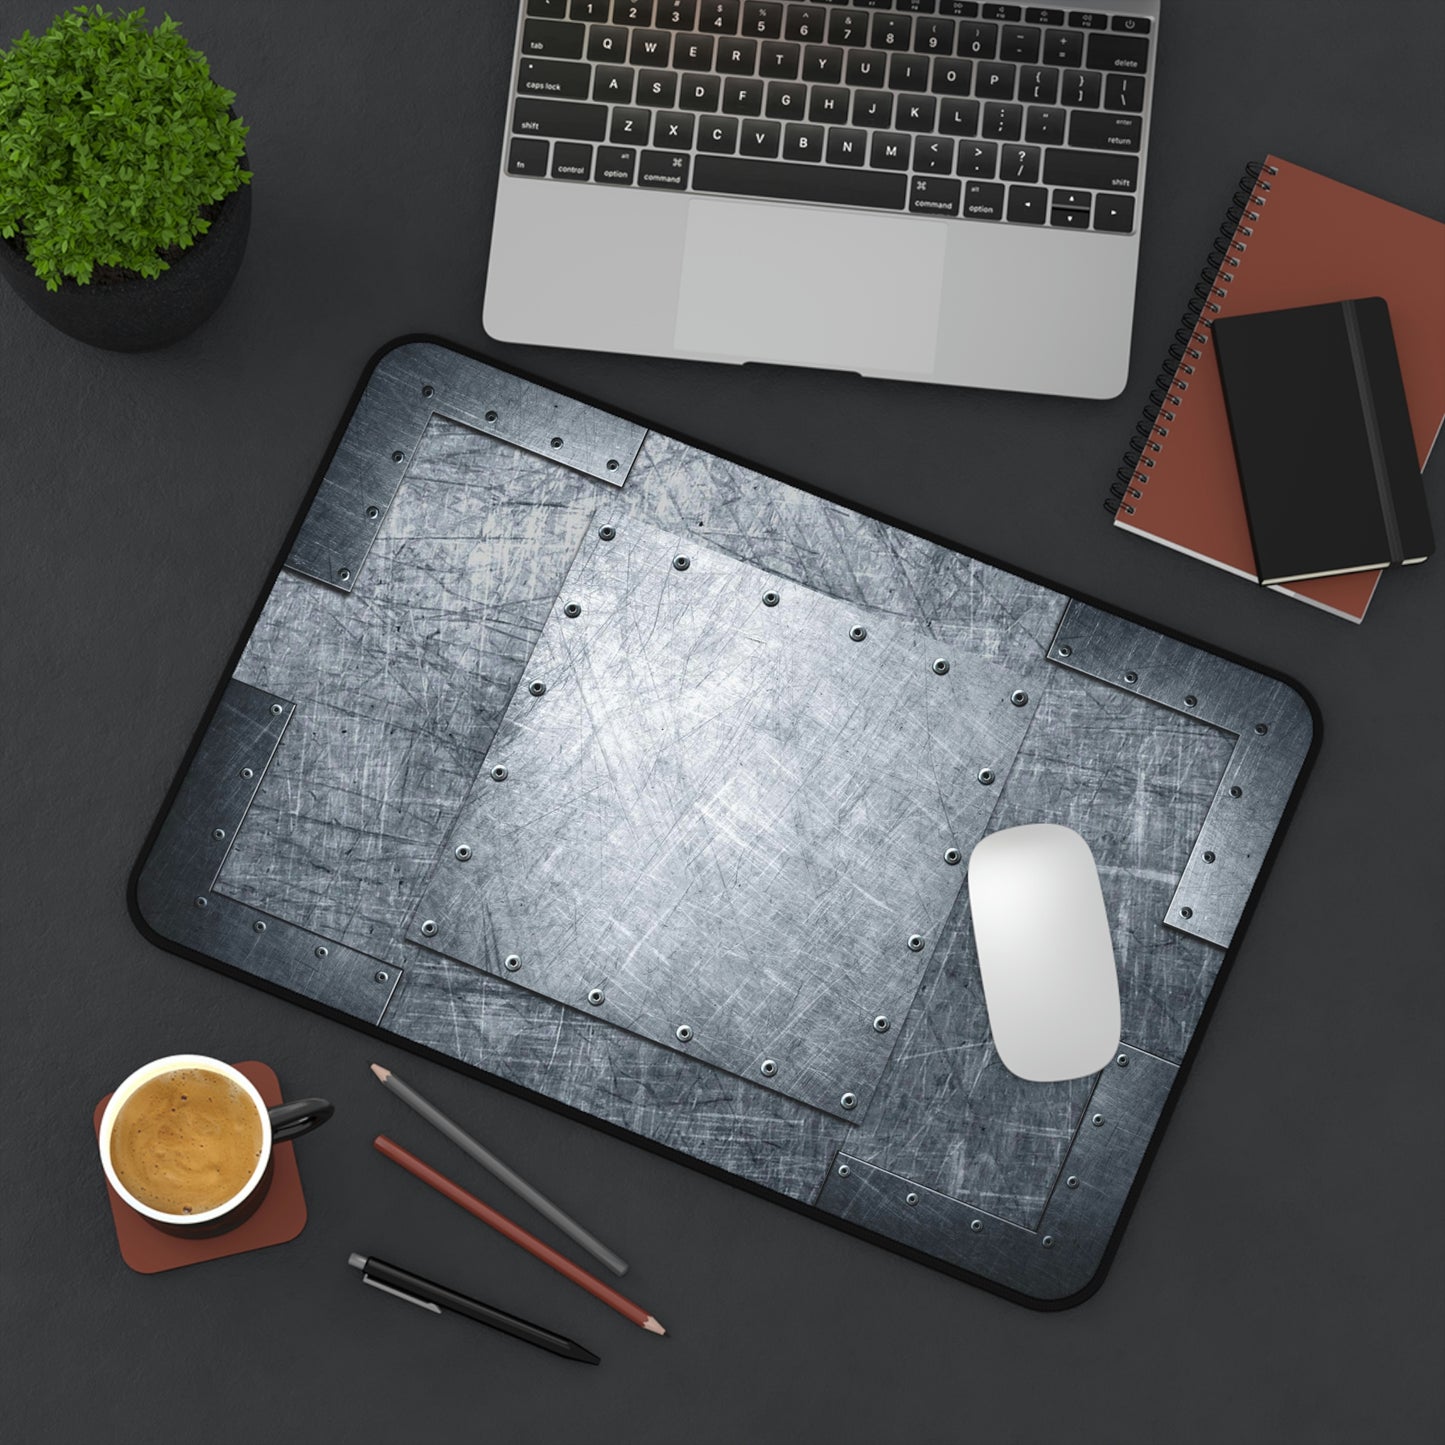 Industrial Themed Desk Accessories - Riveted Steel Sheets Print on Neoprene Desk Mat 12 by 18 on desk with laptop